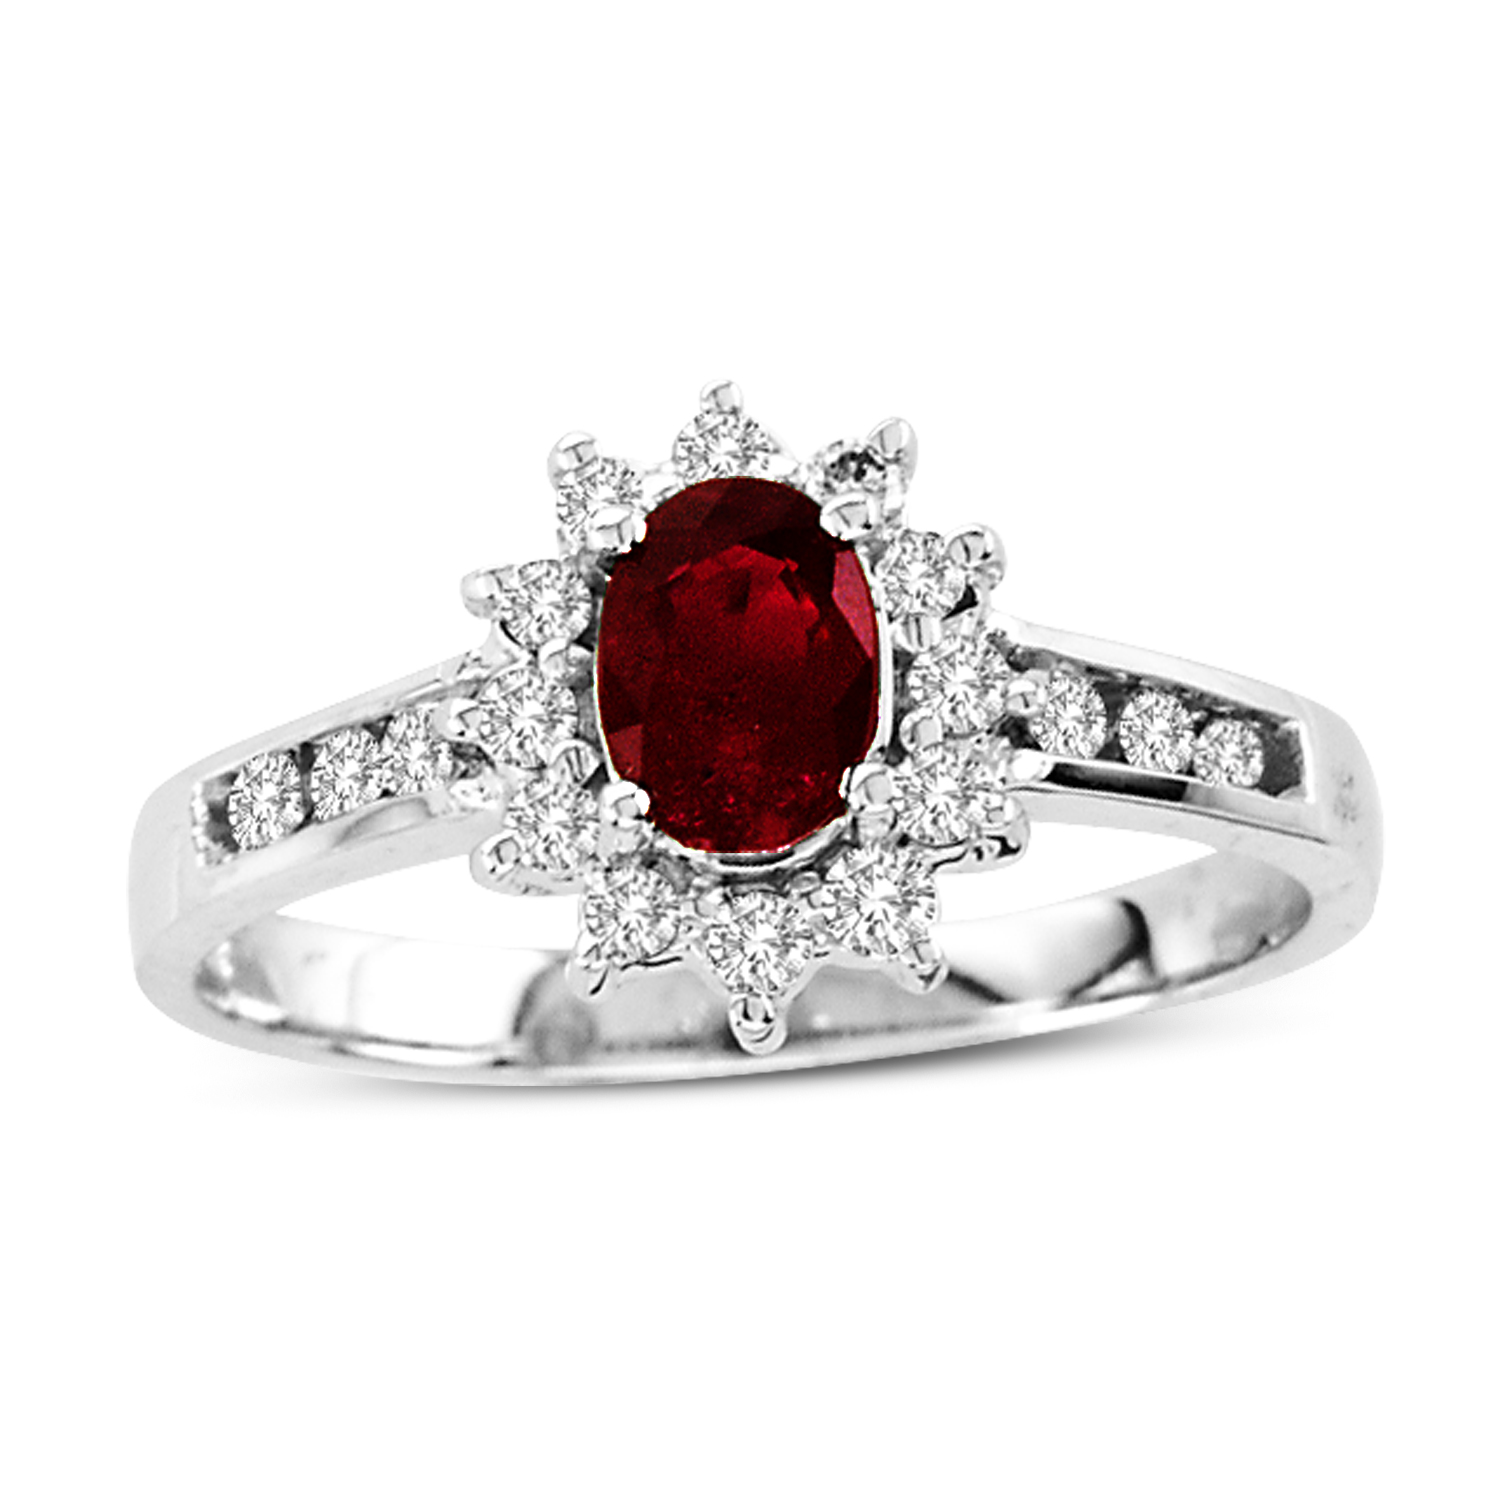 View 0.85cttw Natural Heated Ruby and Diamond Fashion Ring set in 14k Gold